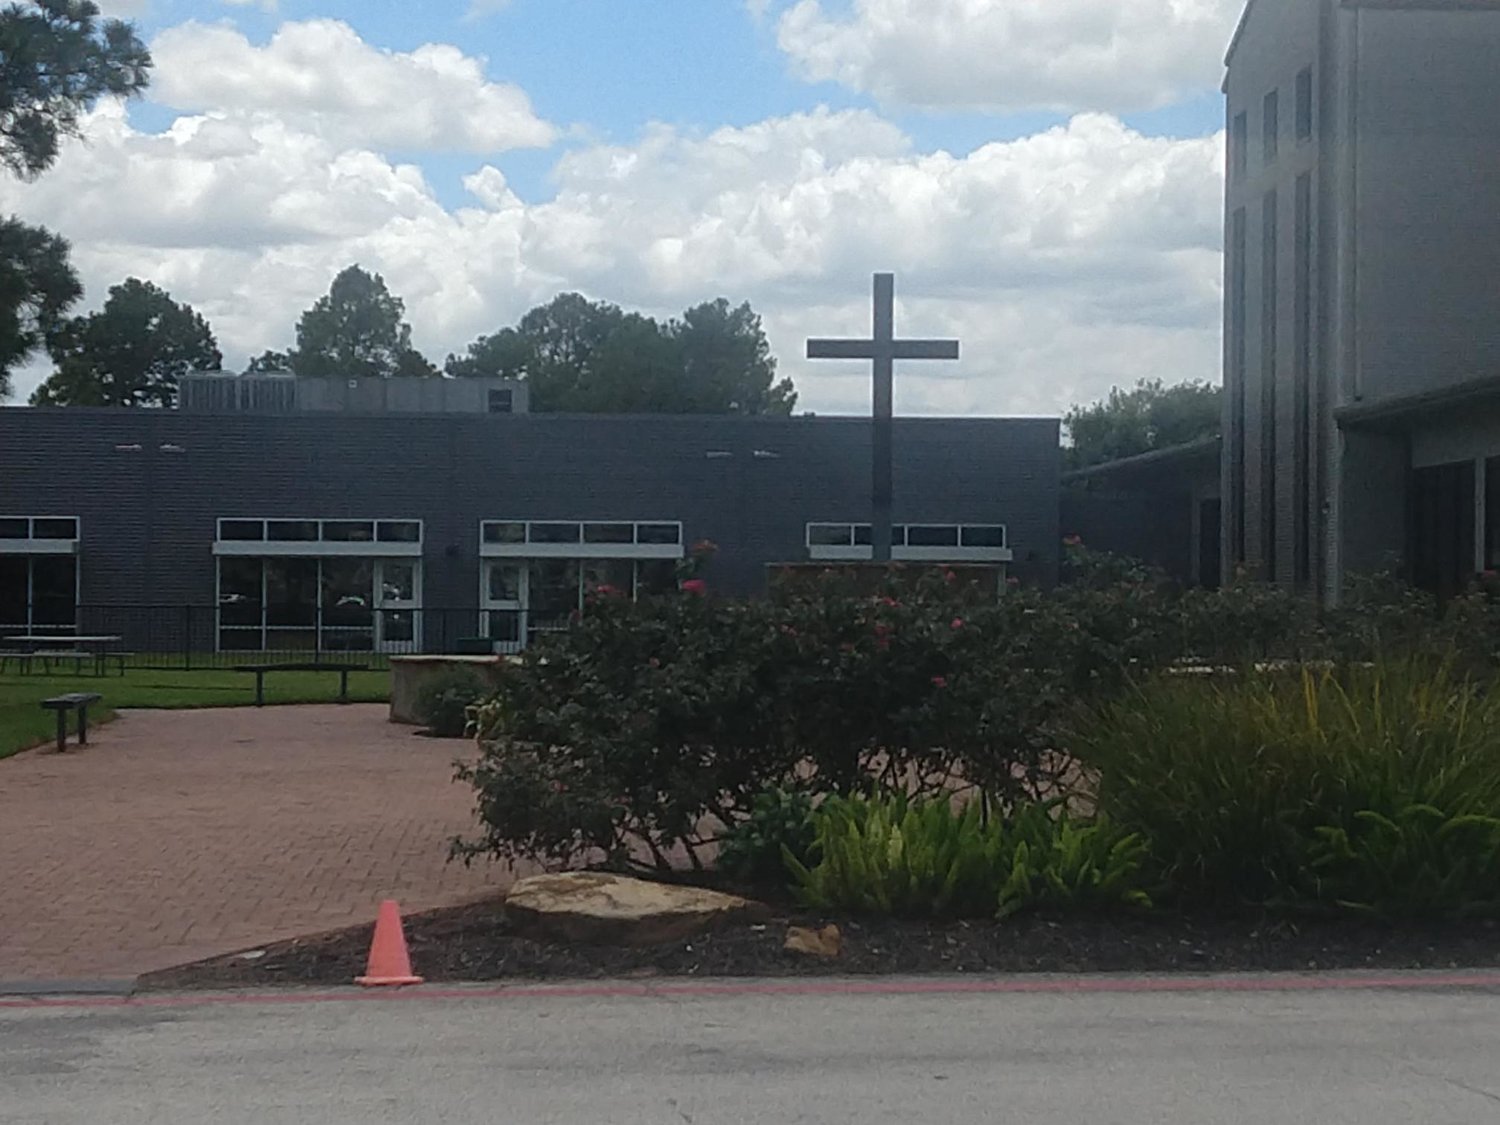 CrossPoint Community Church, pictured, is merging with Emmaus Road Katy.